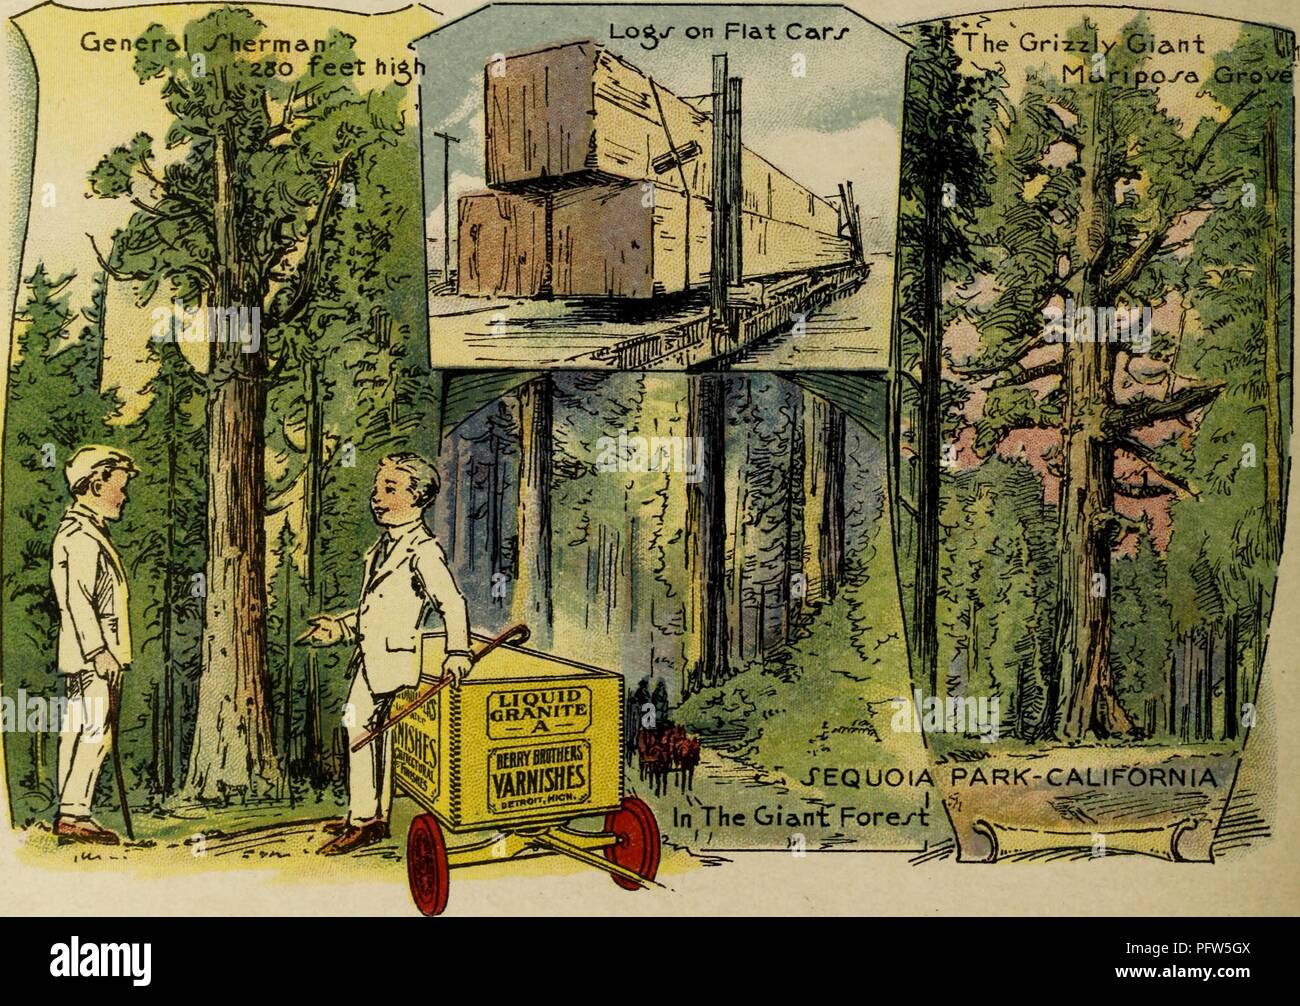 Color illustration depicting several images of California's Sequoia Park, including 'General Sherman, ' 'The Grizzly Giant, ' the 'Mariposa Grove, ' and felled 'Logs on Flat Cars' being carted away, along with the eponymous characters, wearing white suits and standing near a wagon advertising 'Berry Brothers Varnishes, ' from the children's volume 'Seeing America First: with the Berry Brothers, ' authored by Eleanor Colby, and illustrated by FW Pfeiffer, 1917. Courtesy Internet Archive. () Stock Photo